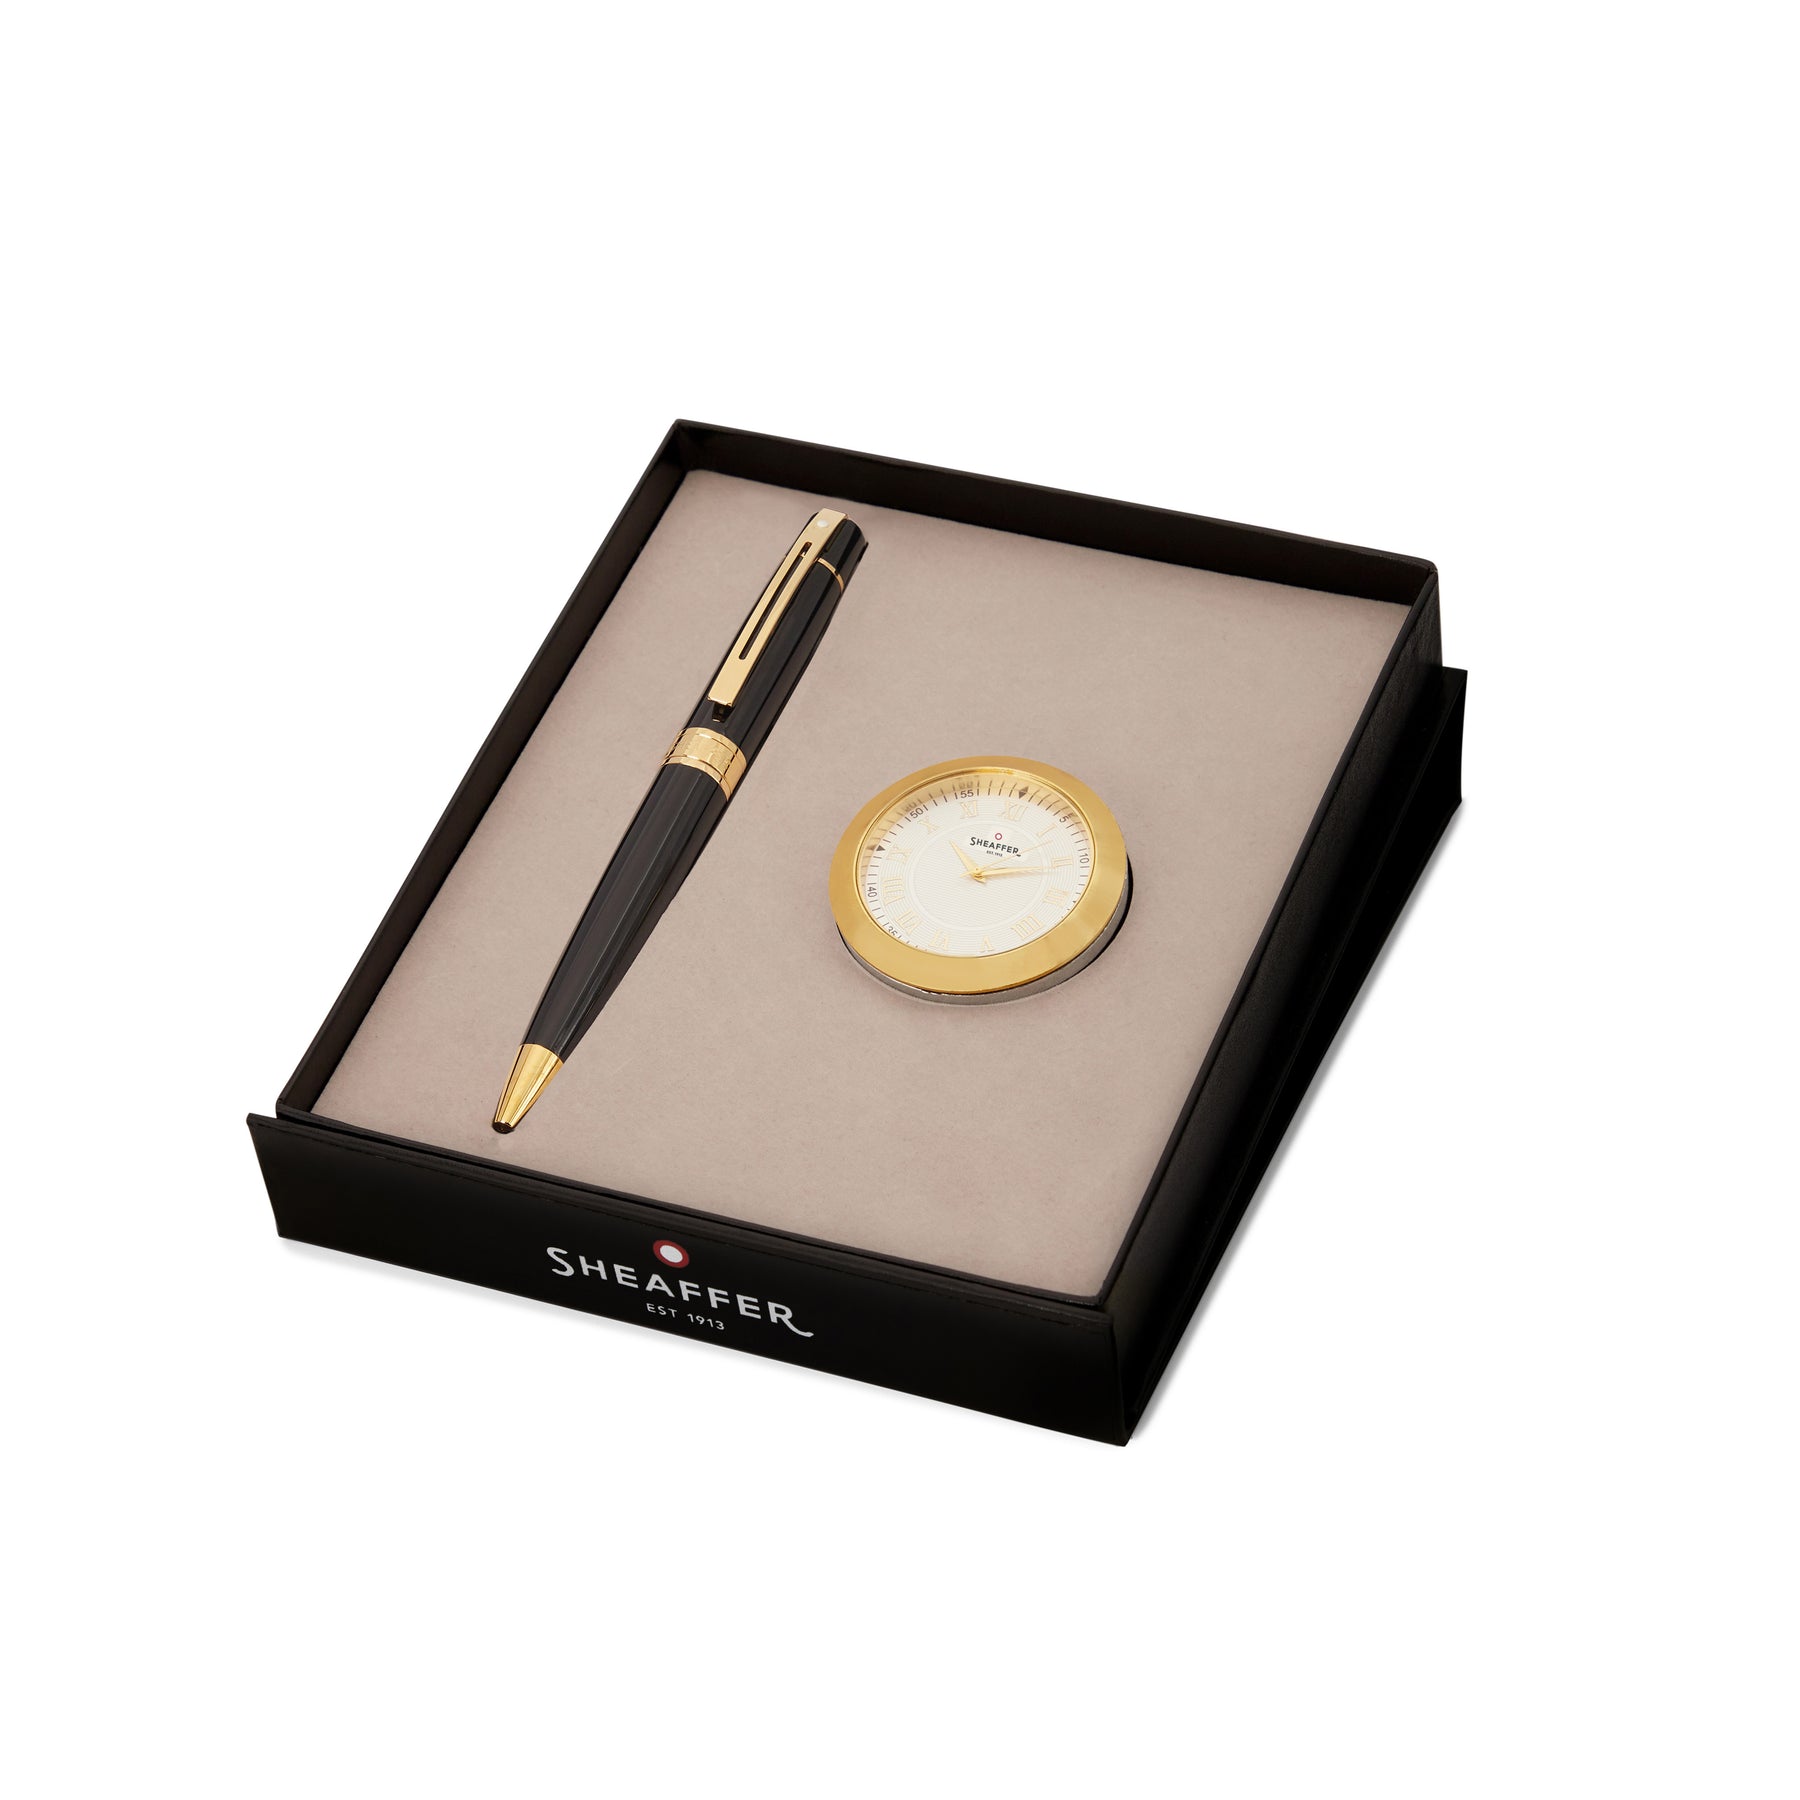 Sheaffer Gift Set ft. Glossy Black 300 Ballpoint Pen with Gold Trims and Table Clock